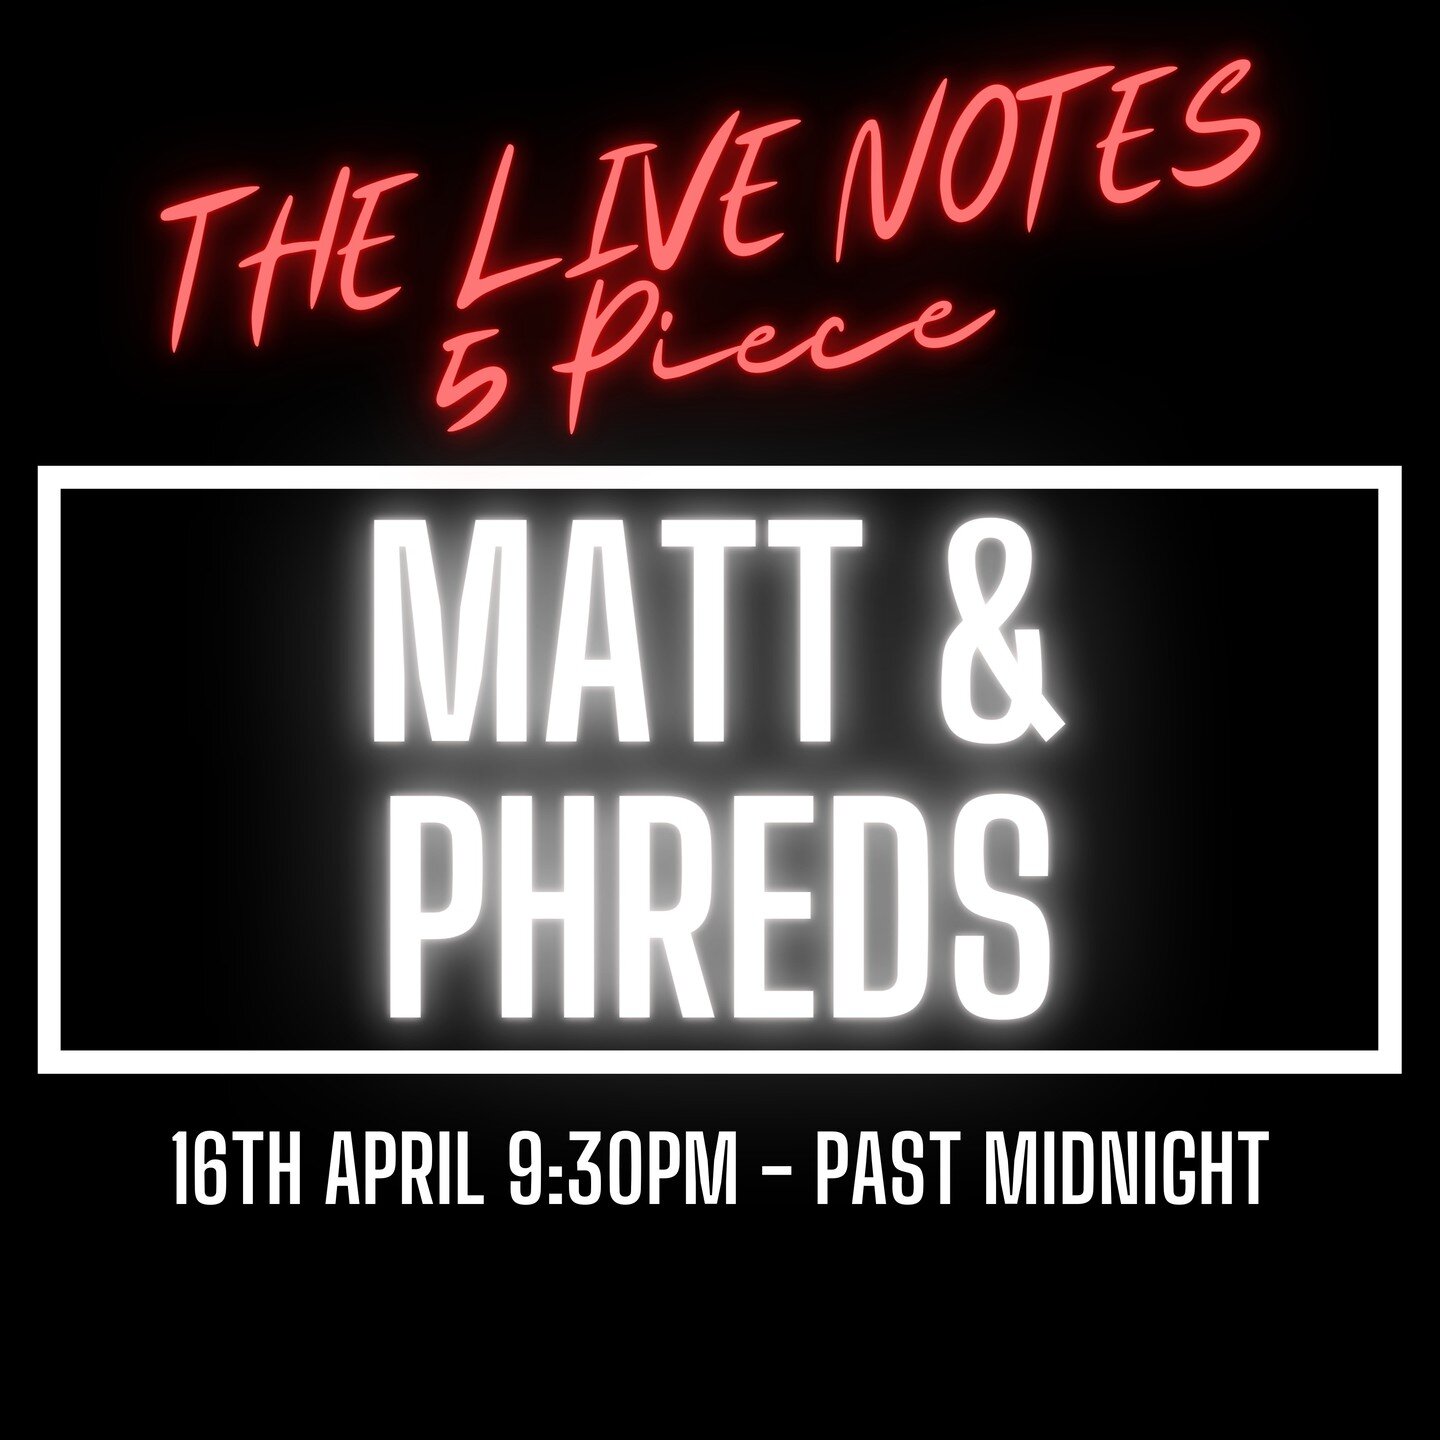 2 weeks tomorrow!

The next installment of The Live Notes @mattandphreds 

This has been a blast every time, and 3/4 of our shows have sold out here. We cant wait to go back again for what could be the biggest show yet over Easter weekend!

Book in, 